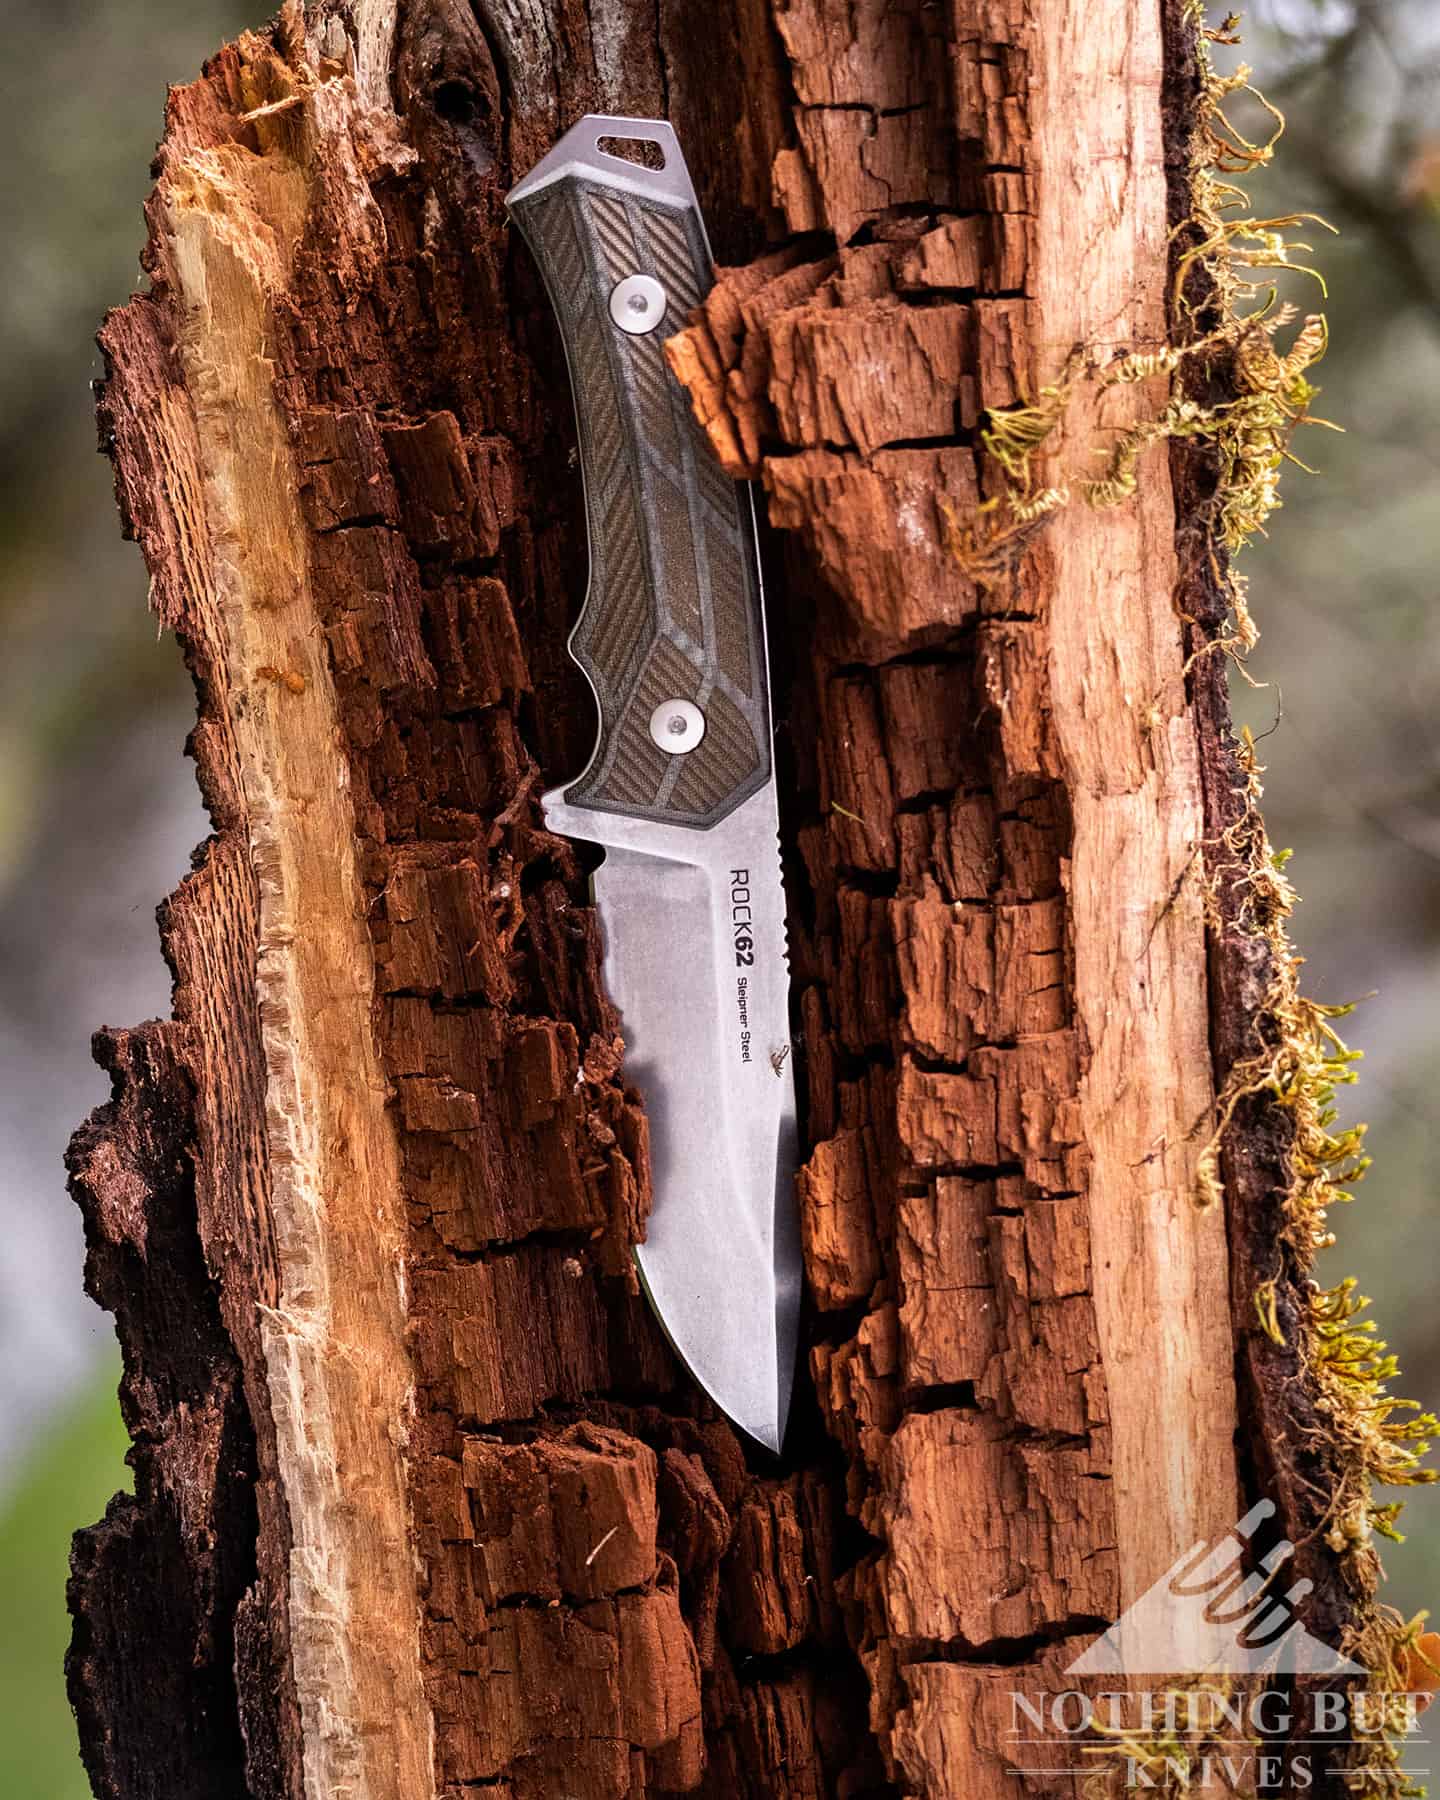 This image shows the Rock 62 knife's right side profile with the model and steel information printed on the blade. 